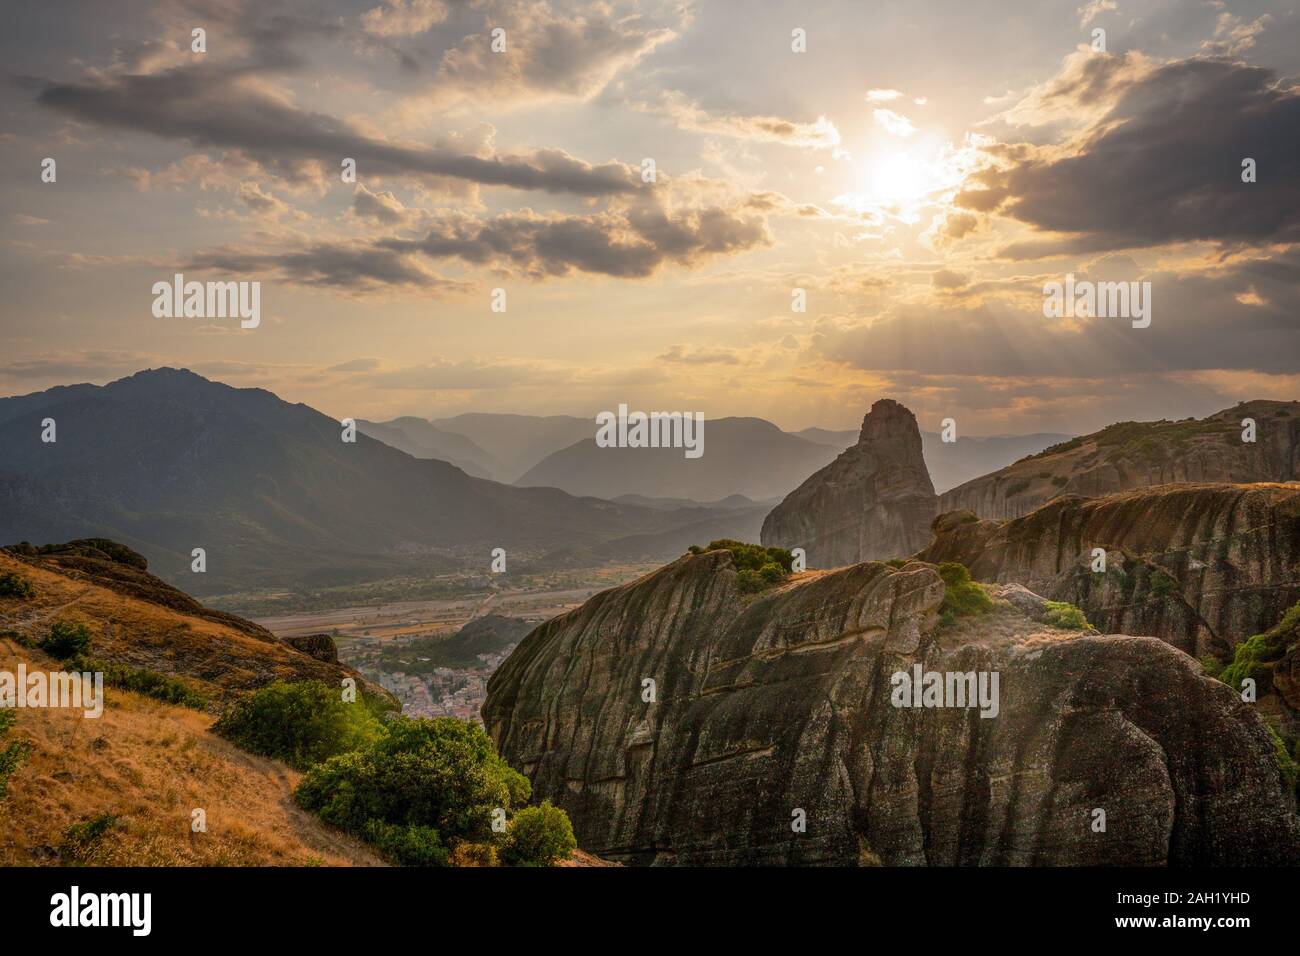 City and mountains in the evening in Greece horizontal Stock Photo